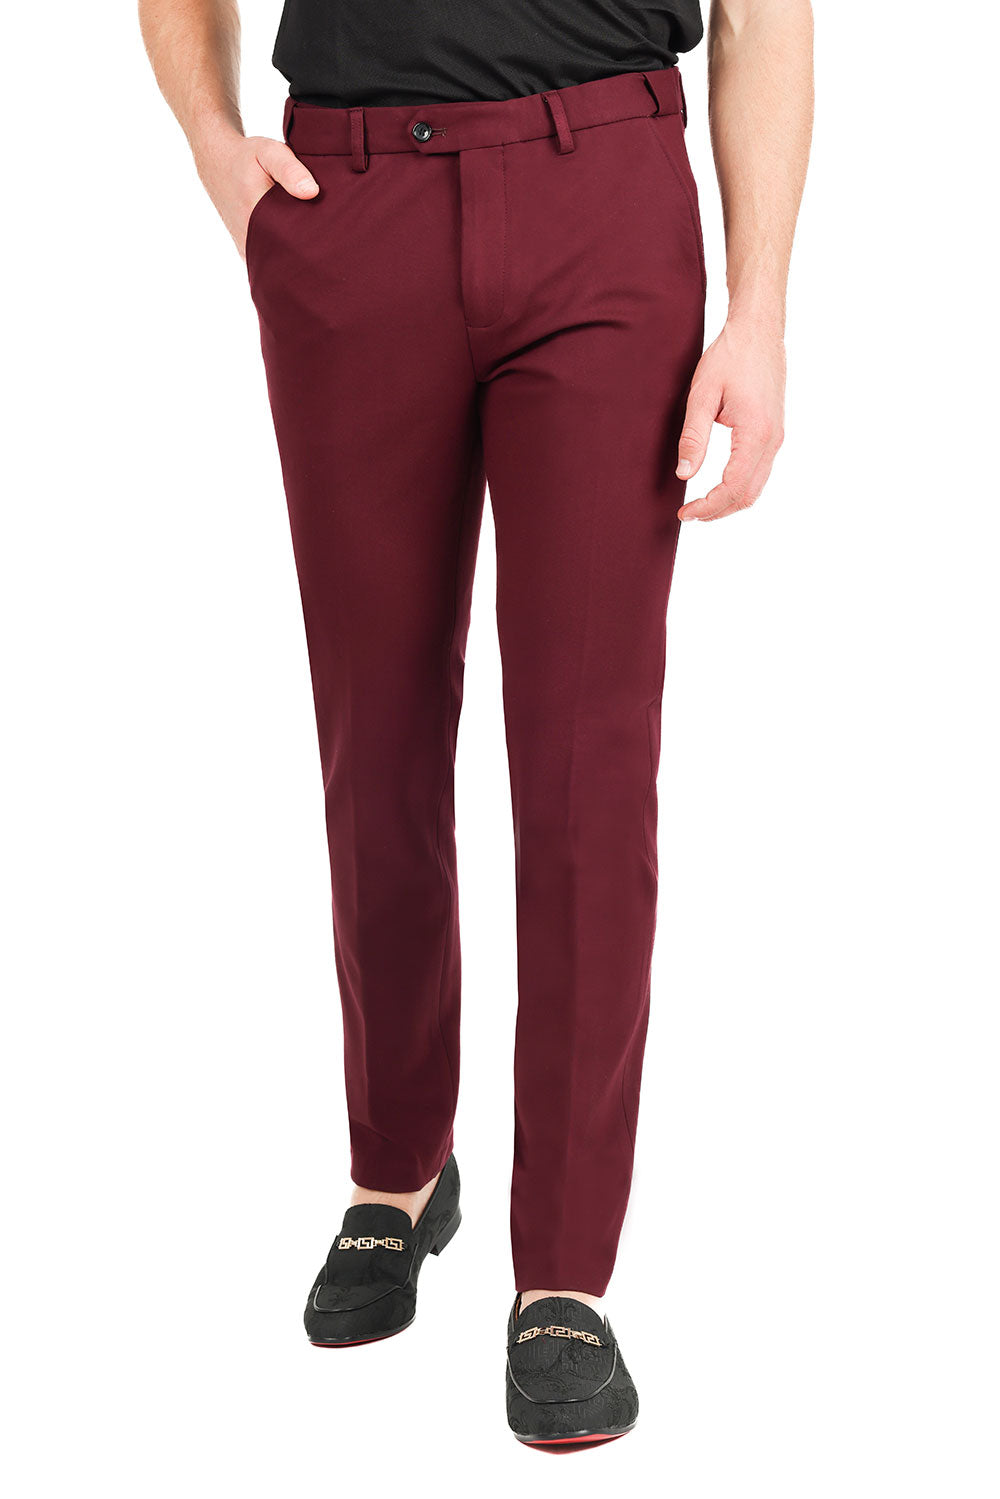 Barabas Men's Solid Color Basic Essential Chino Dress Pants 2CP196 Burgundy